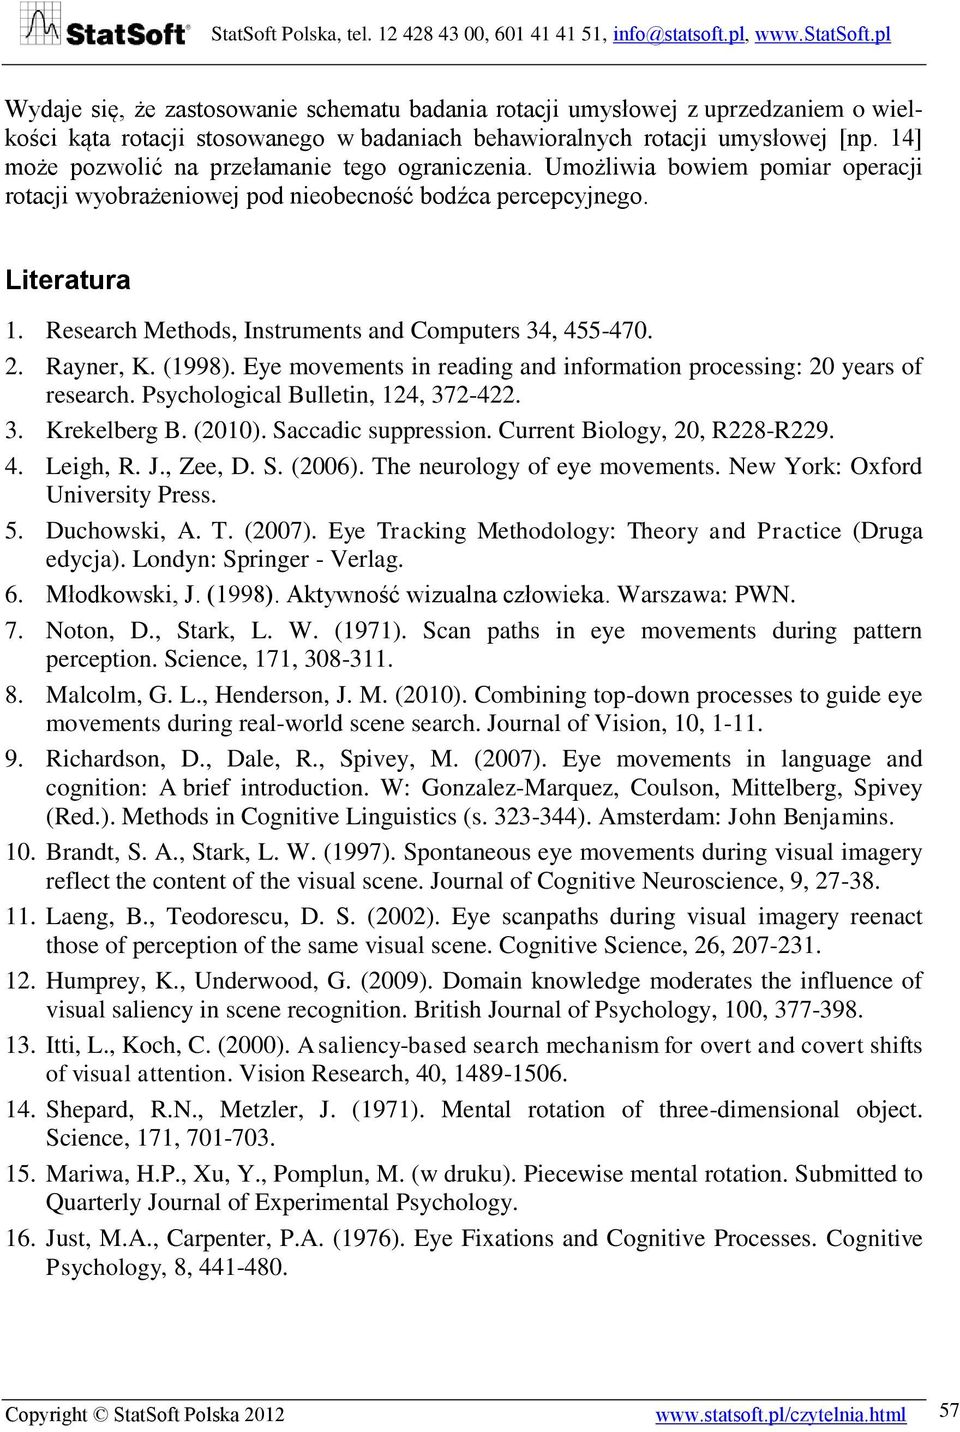 Research Methods, Instruments and Computers 34, 455-470. 2. Rayner, K. (1998). Eye movements in reading and information processing: 20 years of research. Psychological Bulletin, 124, 372-422. 3. Krekelberg B.